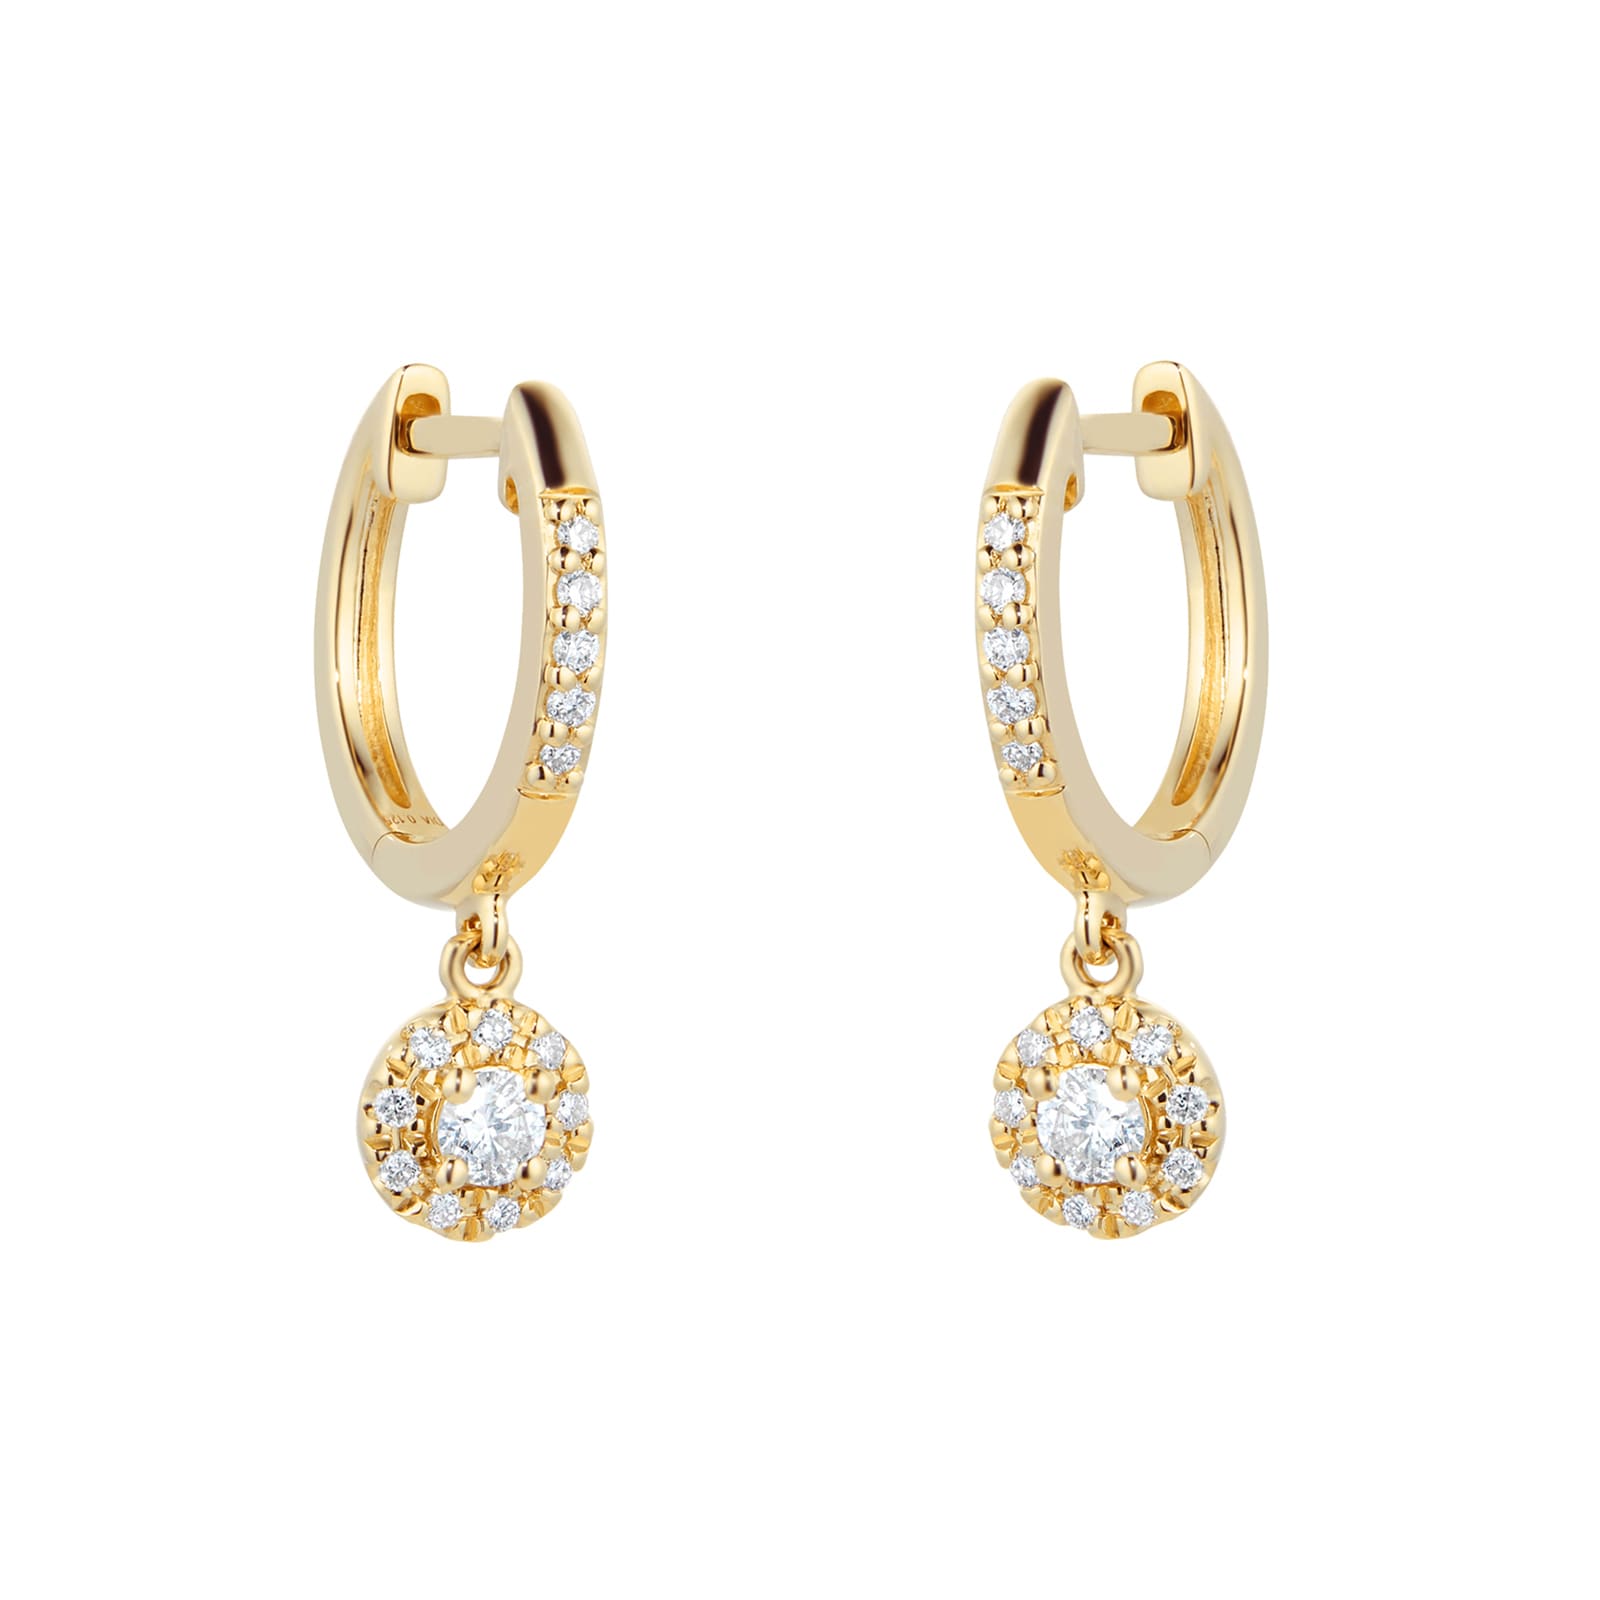 Argos Product Support for 9ct Gold Plated Silver Cubic Zirconia 'Mum'  Earrings (425/3224)